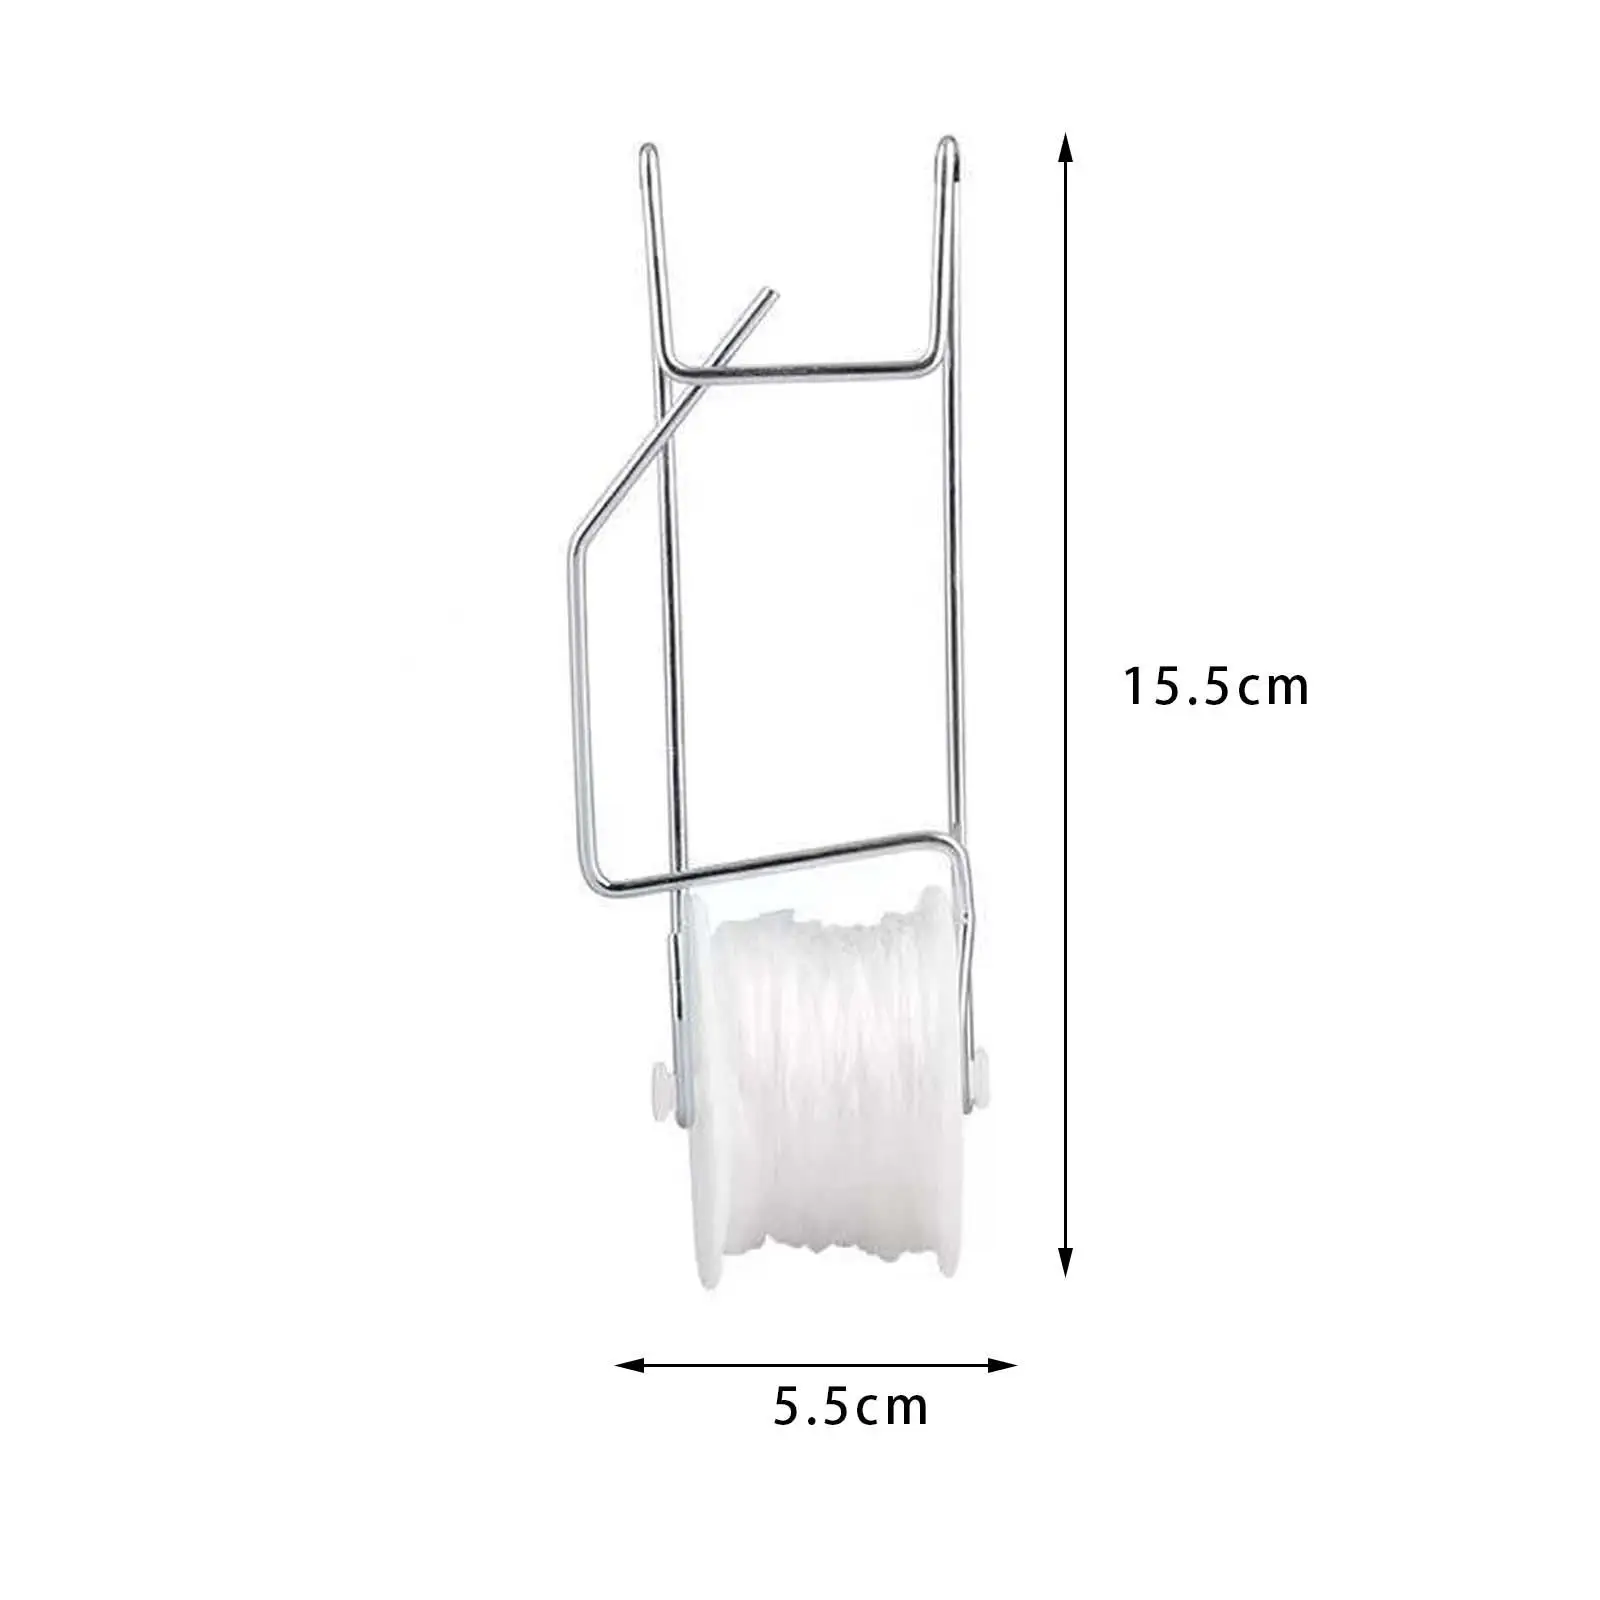 Tomato Roller Hook with 15M Twine Professional Accessory Multifunctional Weather Resistant White Sturdy for Plant Growth